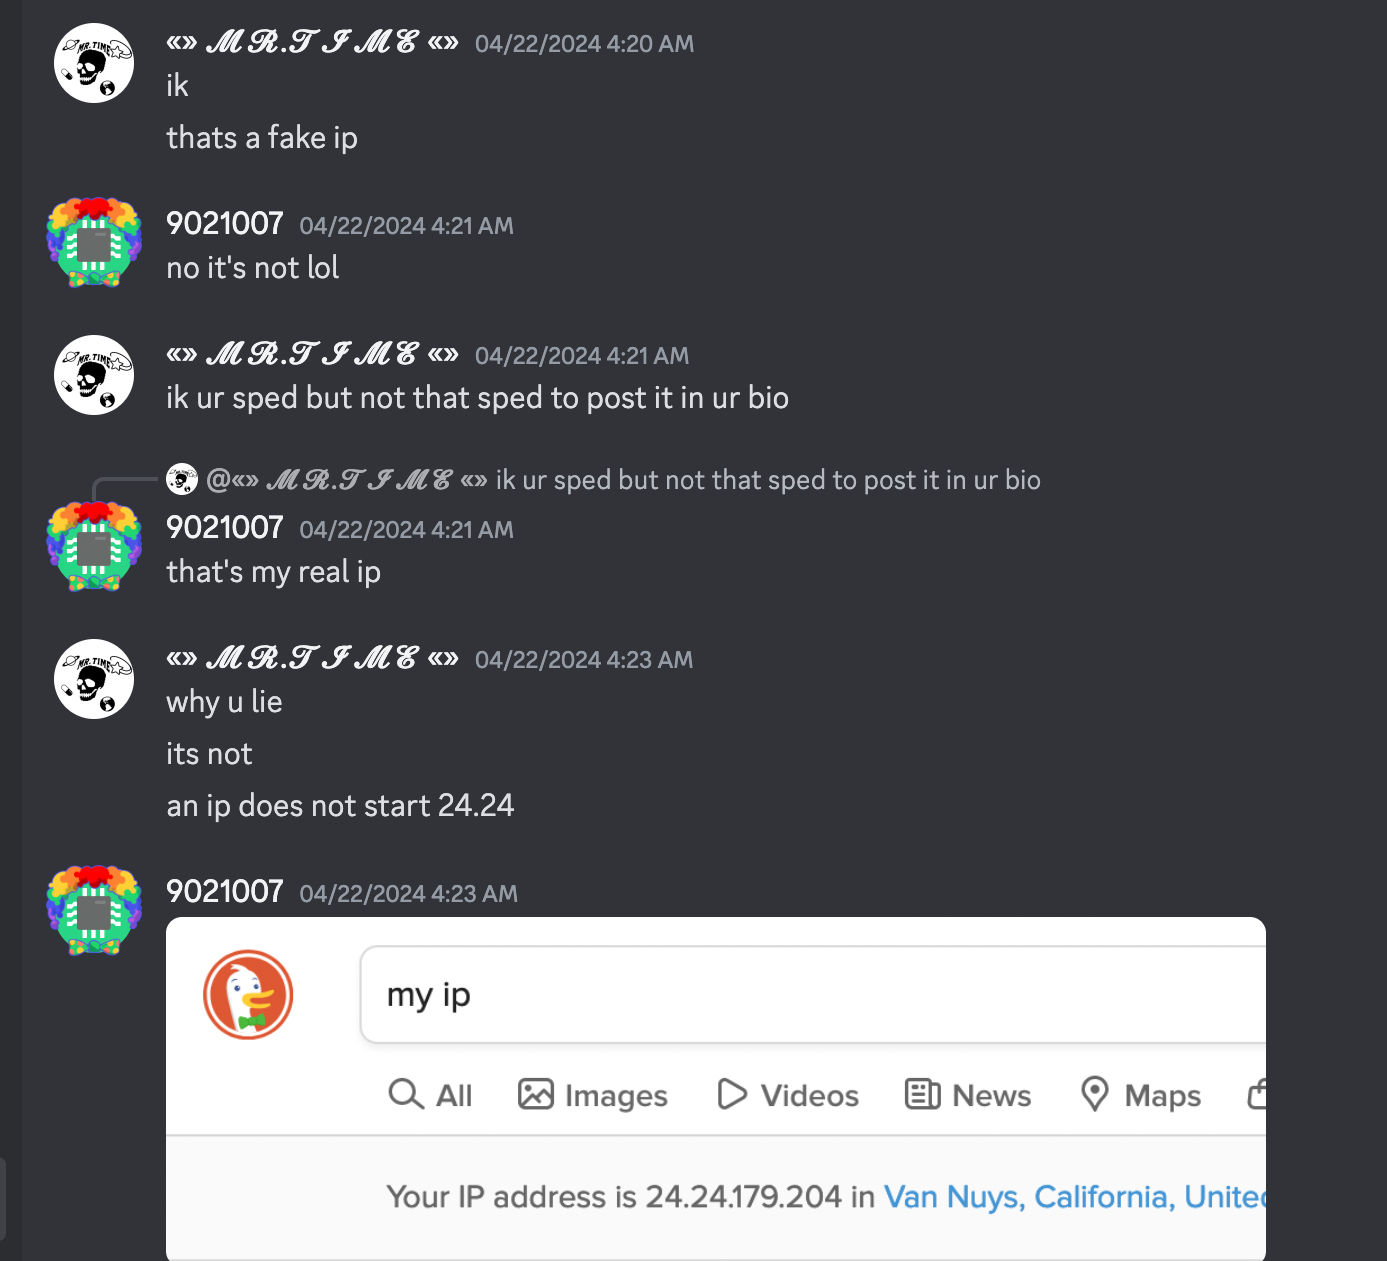 mr.time says "ik", "thats a fake ip", 9021007 says "no it's not lol", mr.time says "ik ur sped but not that sped to post it in your bio", 9021007 replies "that's my real ip", mr.time says "why u lie", "its not", "an ip does not start 24.24", 9021007 sends an image of a duckduckgo search for "my ip" with the ip address 24.24.179.204 as the result